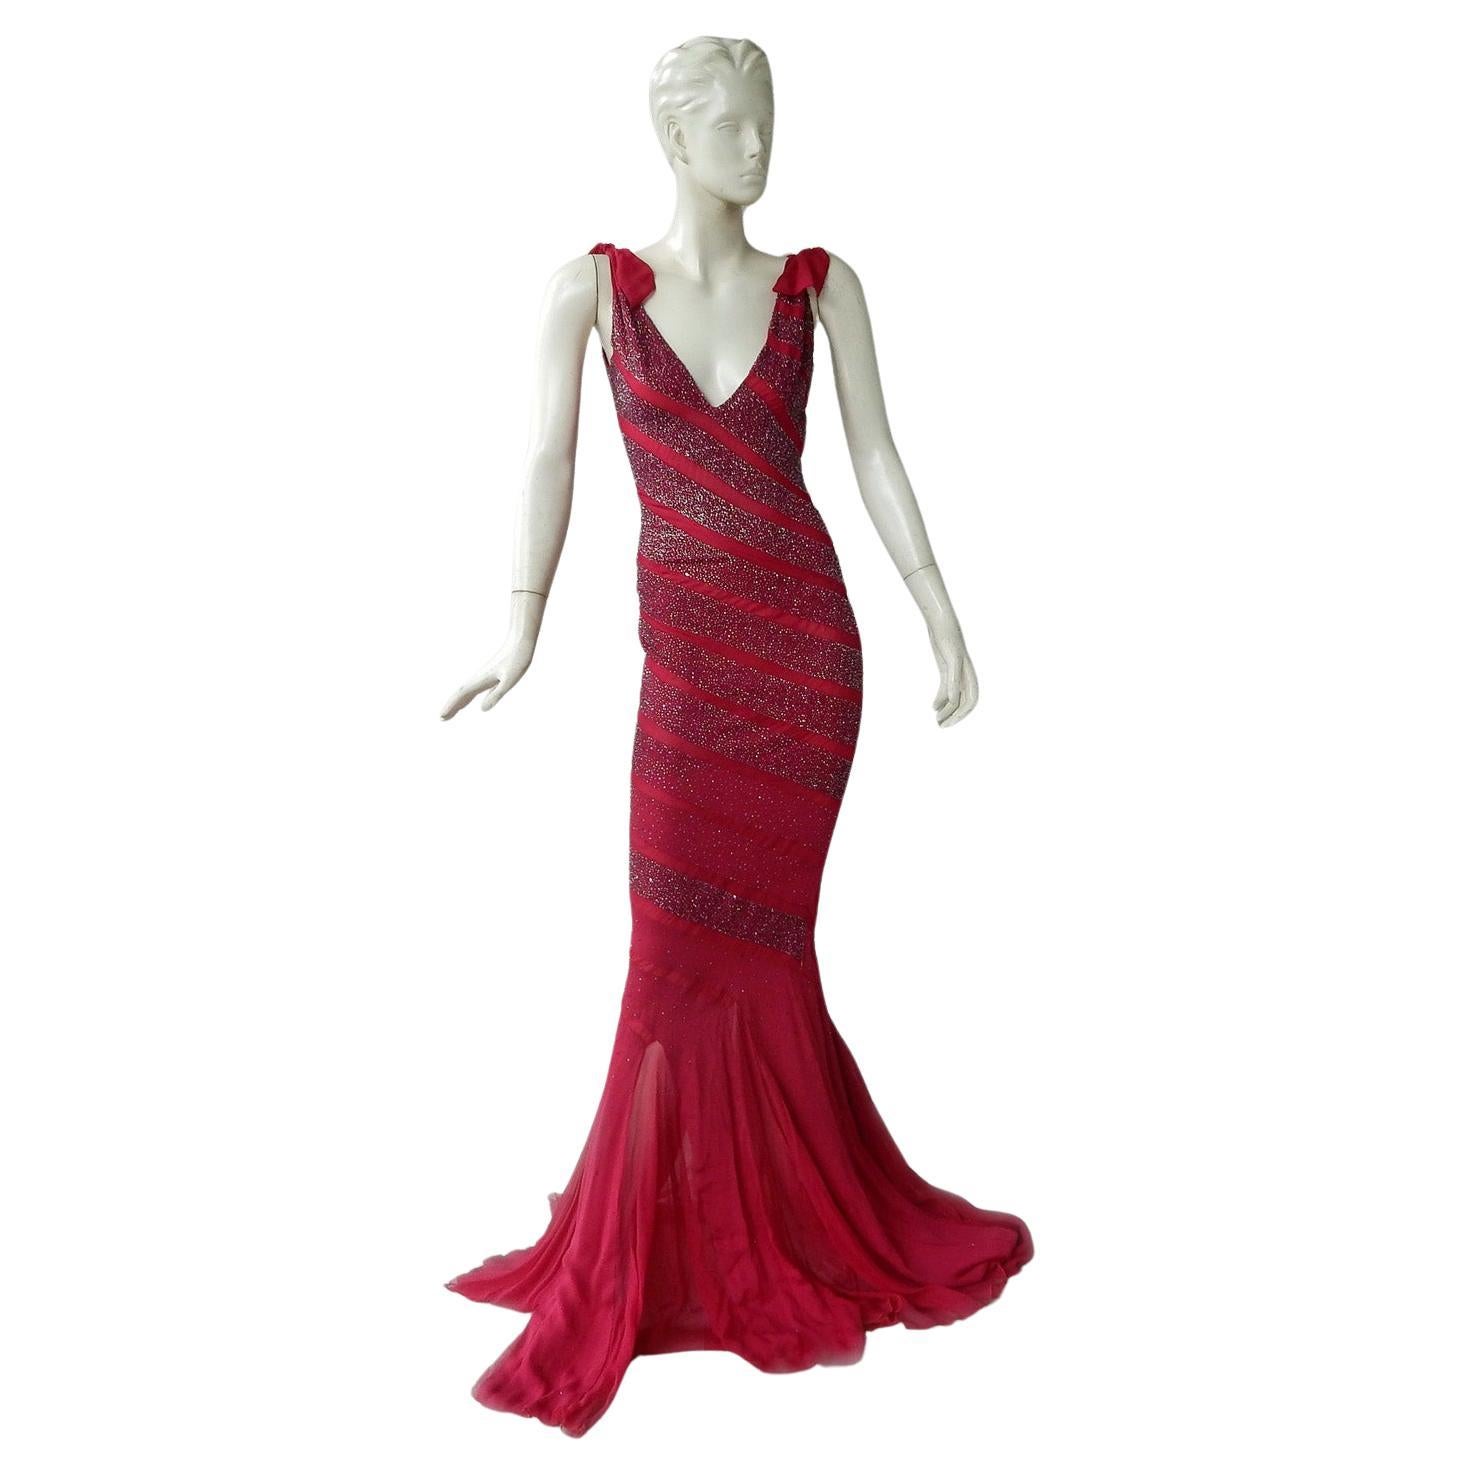 Gucci Vintage Beaded Evening Dress Gown   NWT